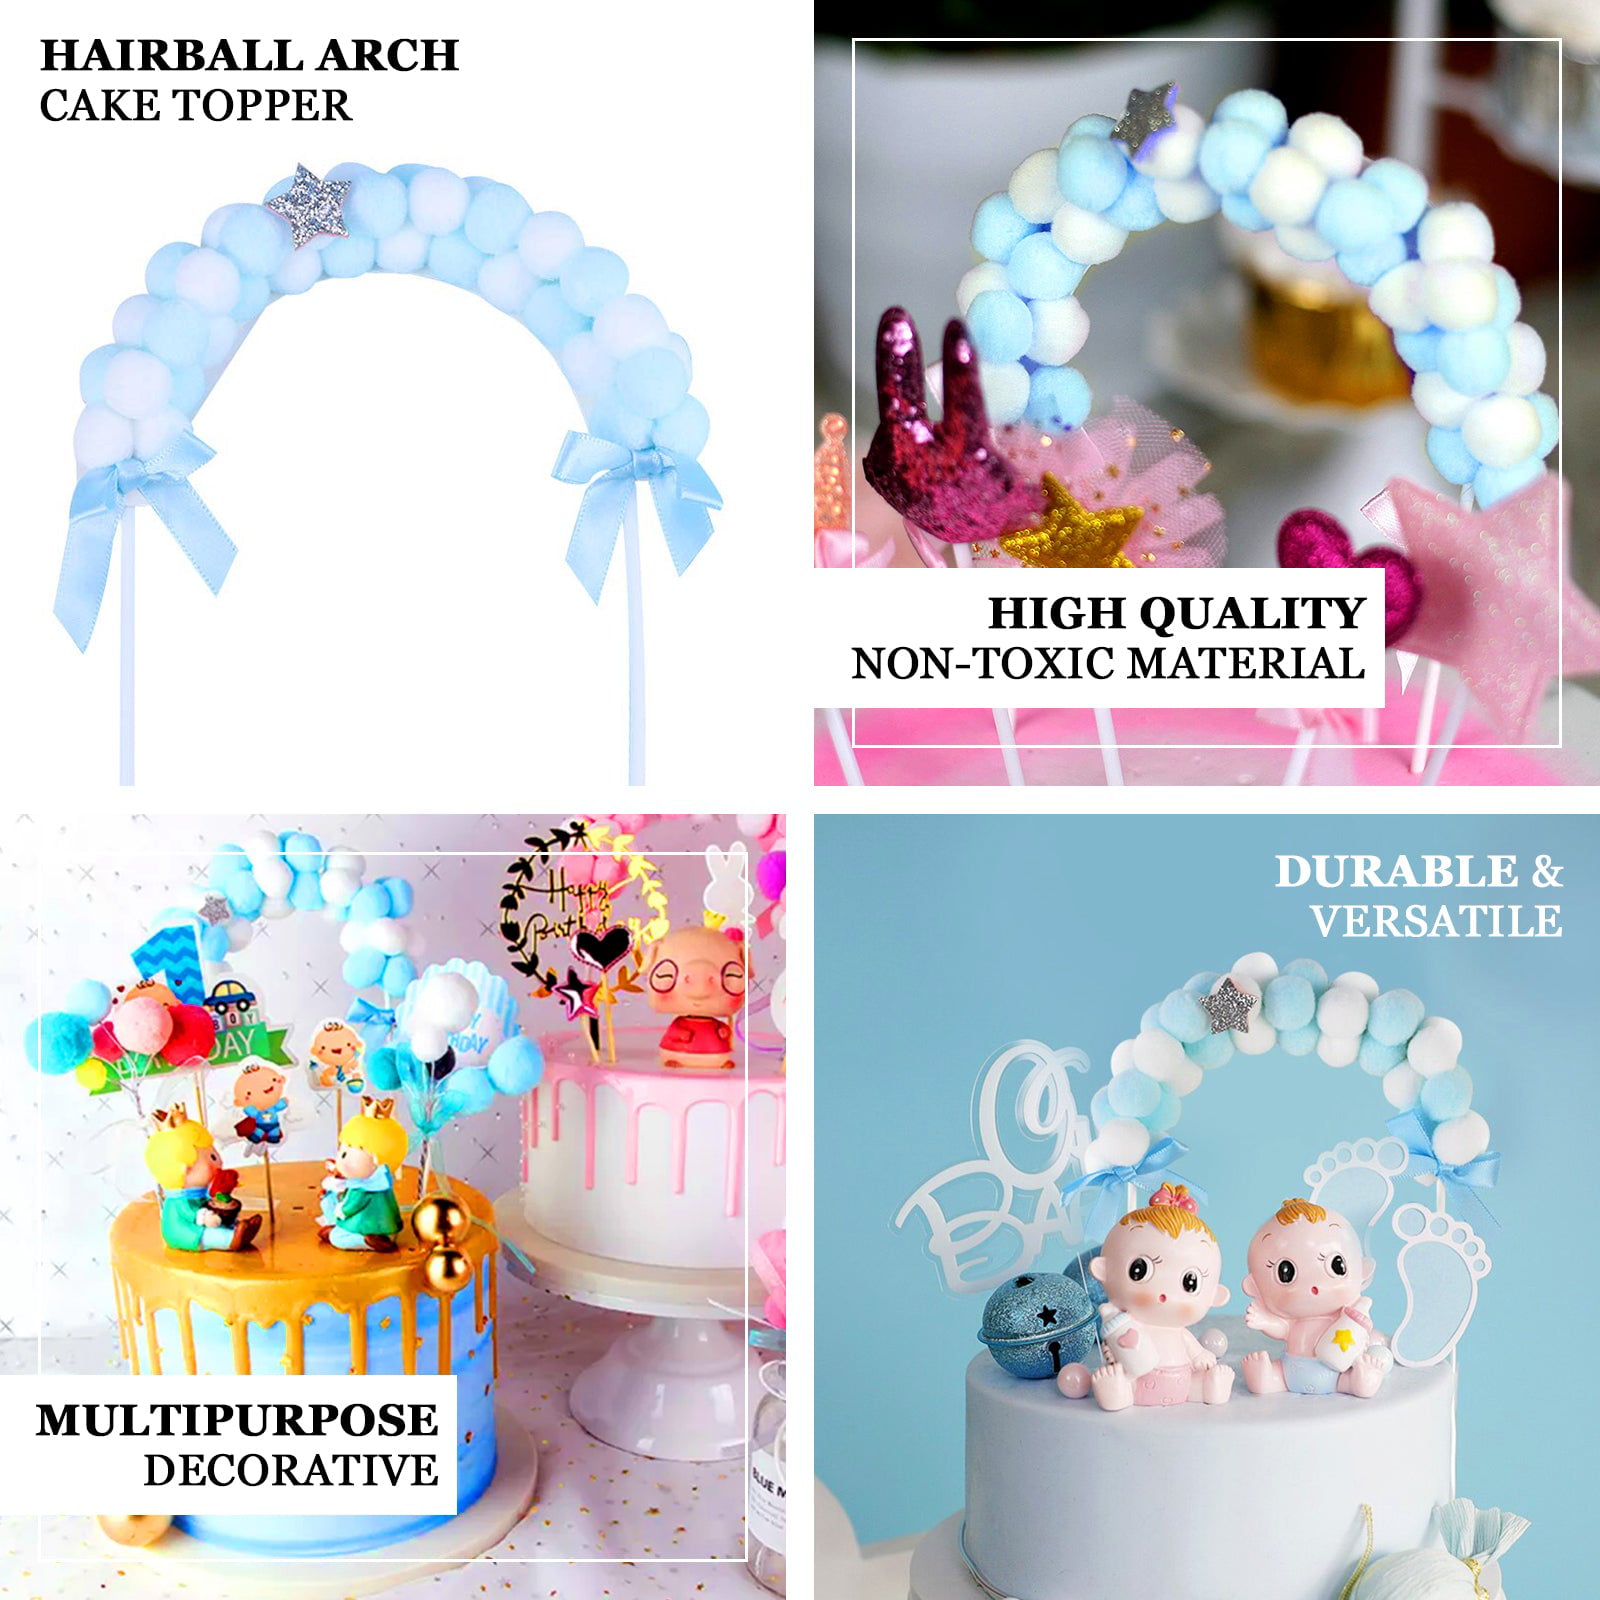 Large Arch Cake Topper